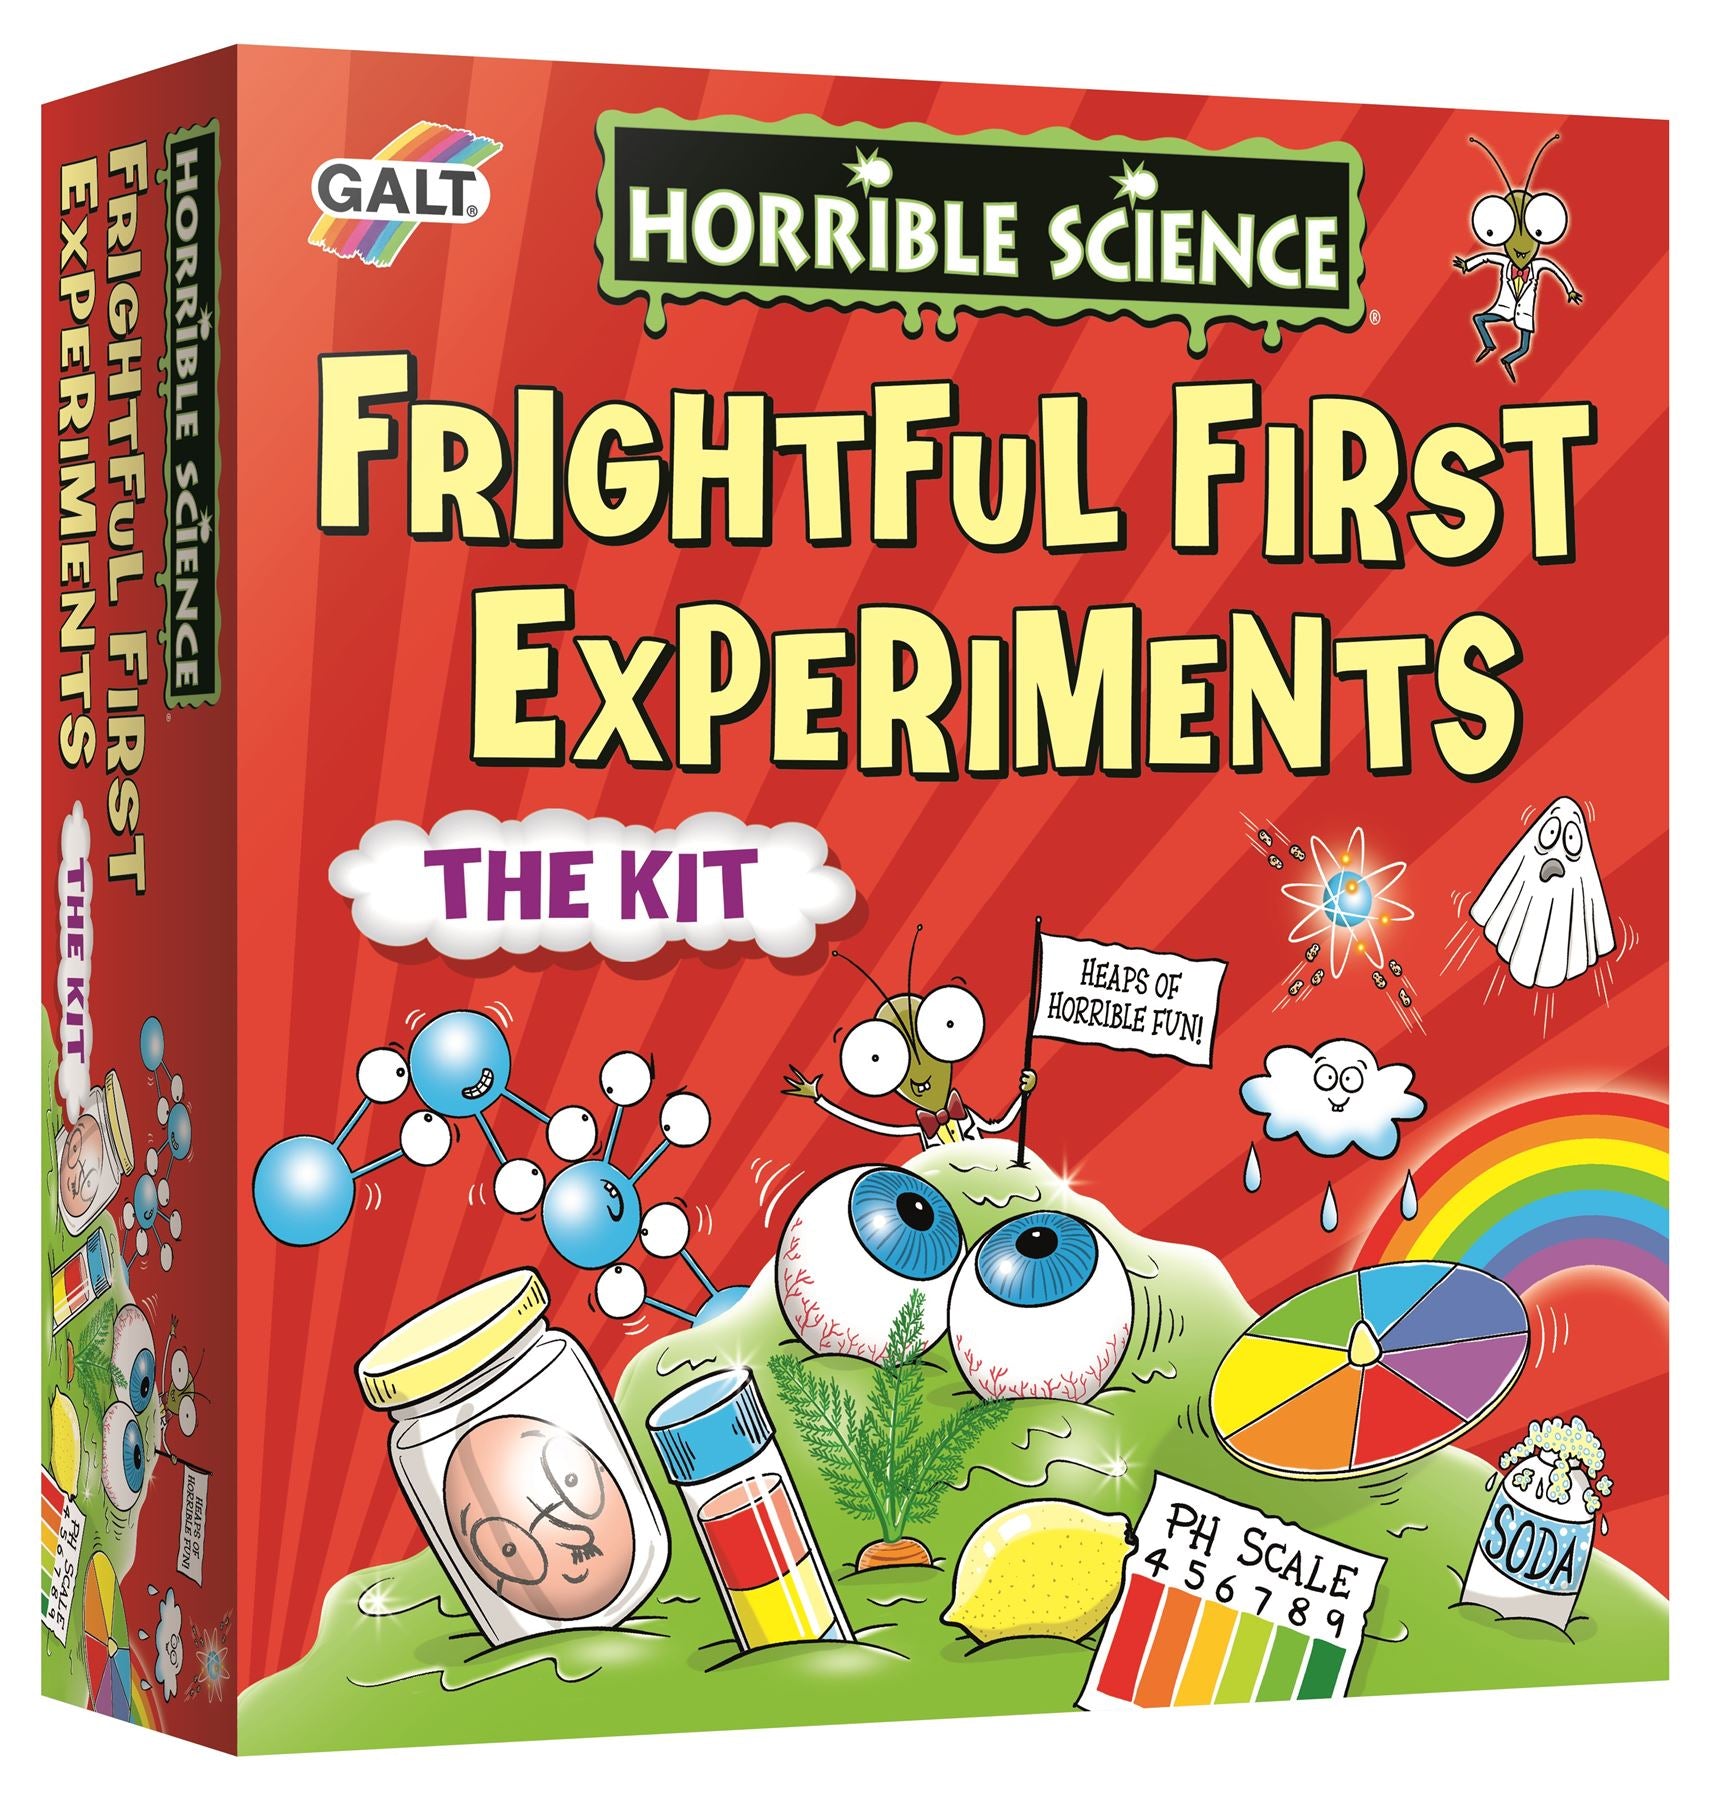 (Bashed) Galt Toys Horrible Science Frightful First Experiments